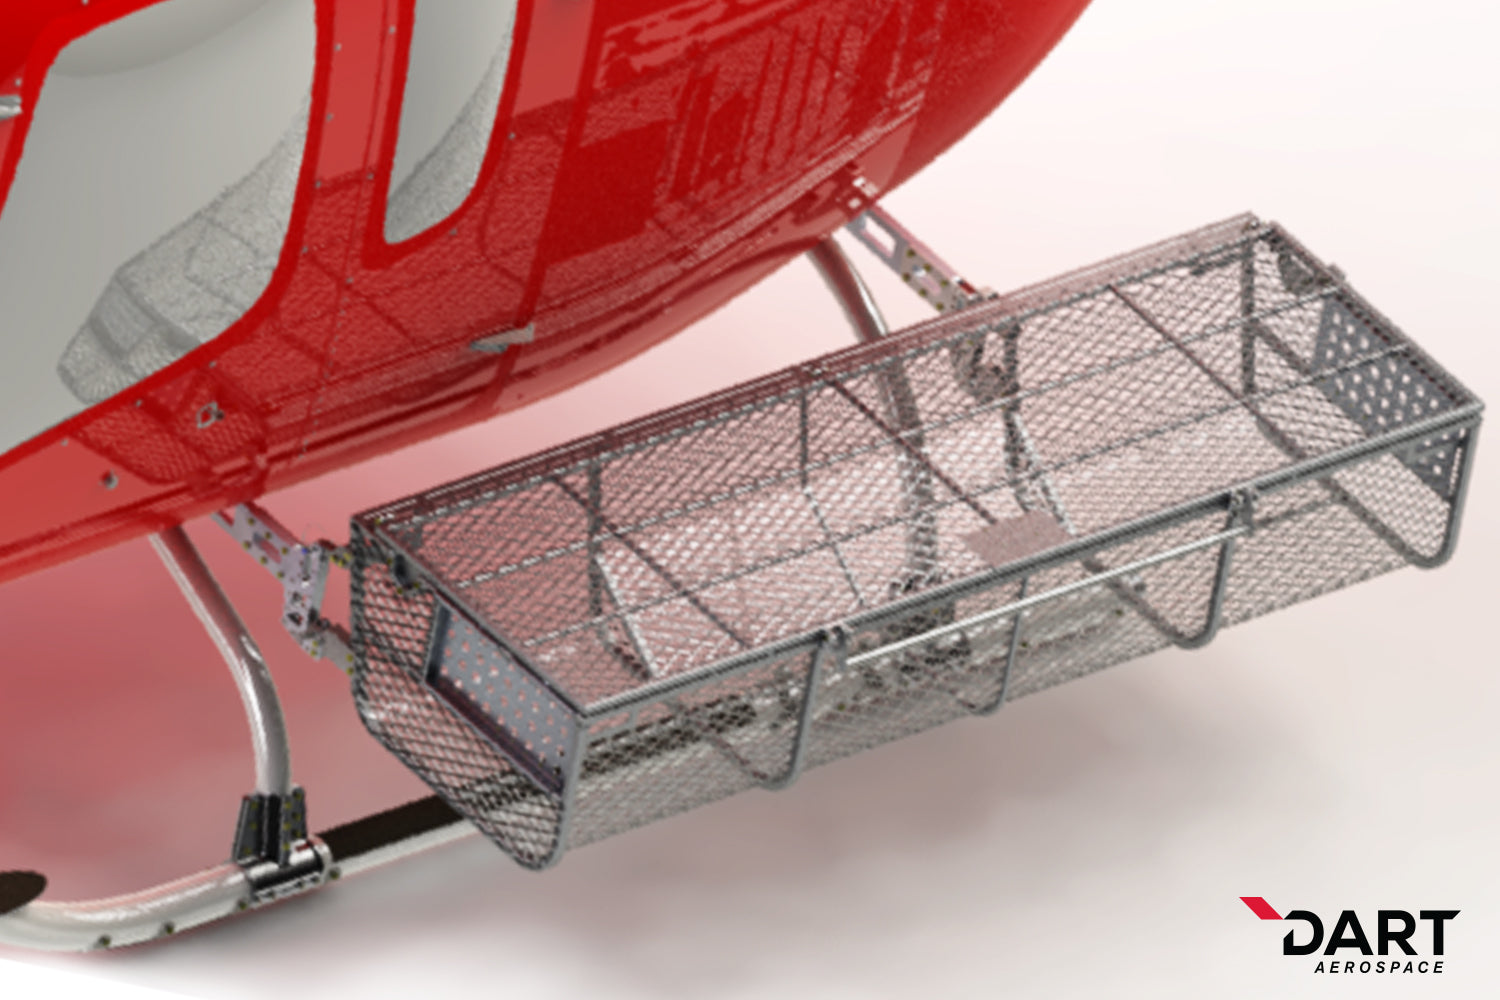 DART Aerospace announces the launch of its new Bell 505 external cargo Heli-Utility- Basket™